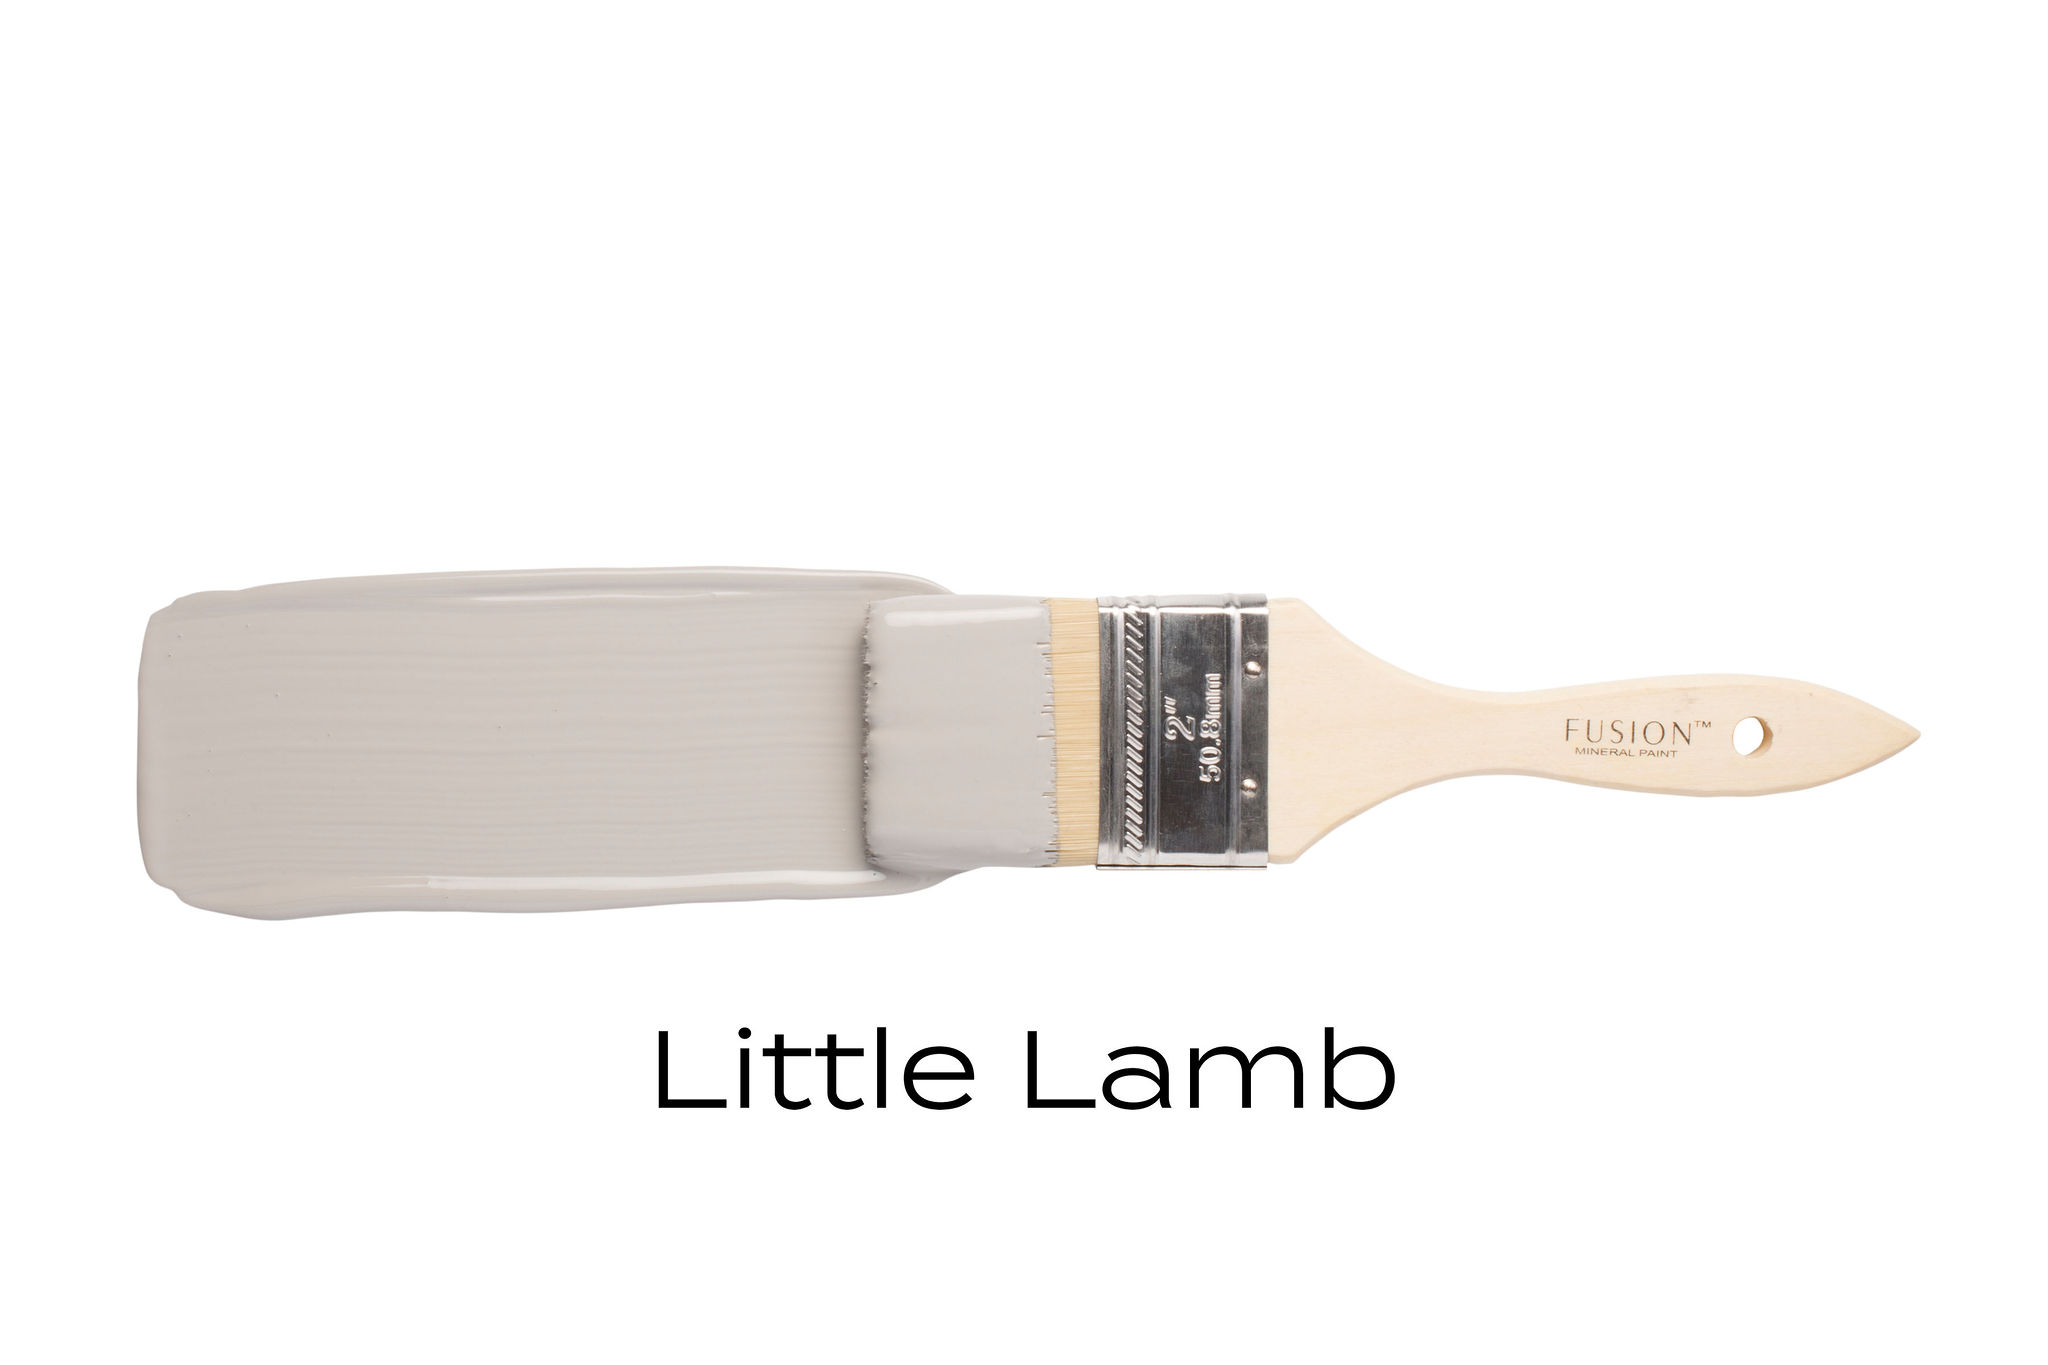 Little lamb Fusion Mineral Paint Goed Gestyled Brielle